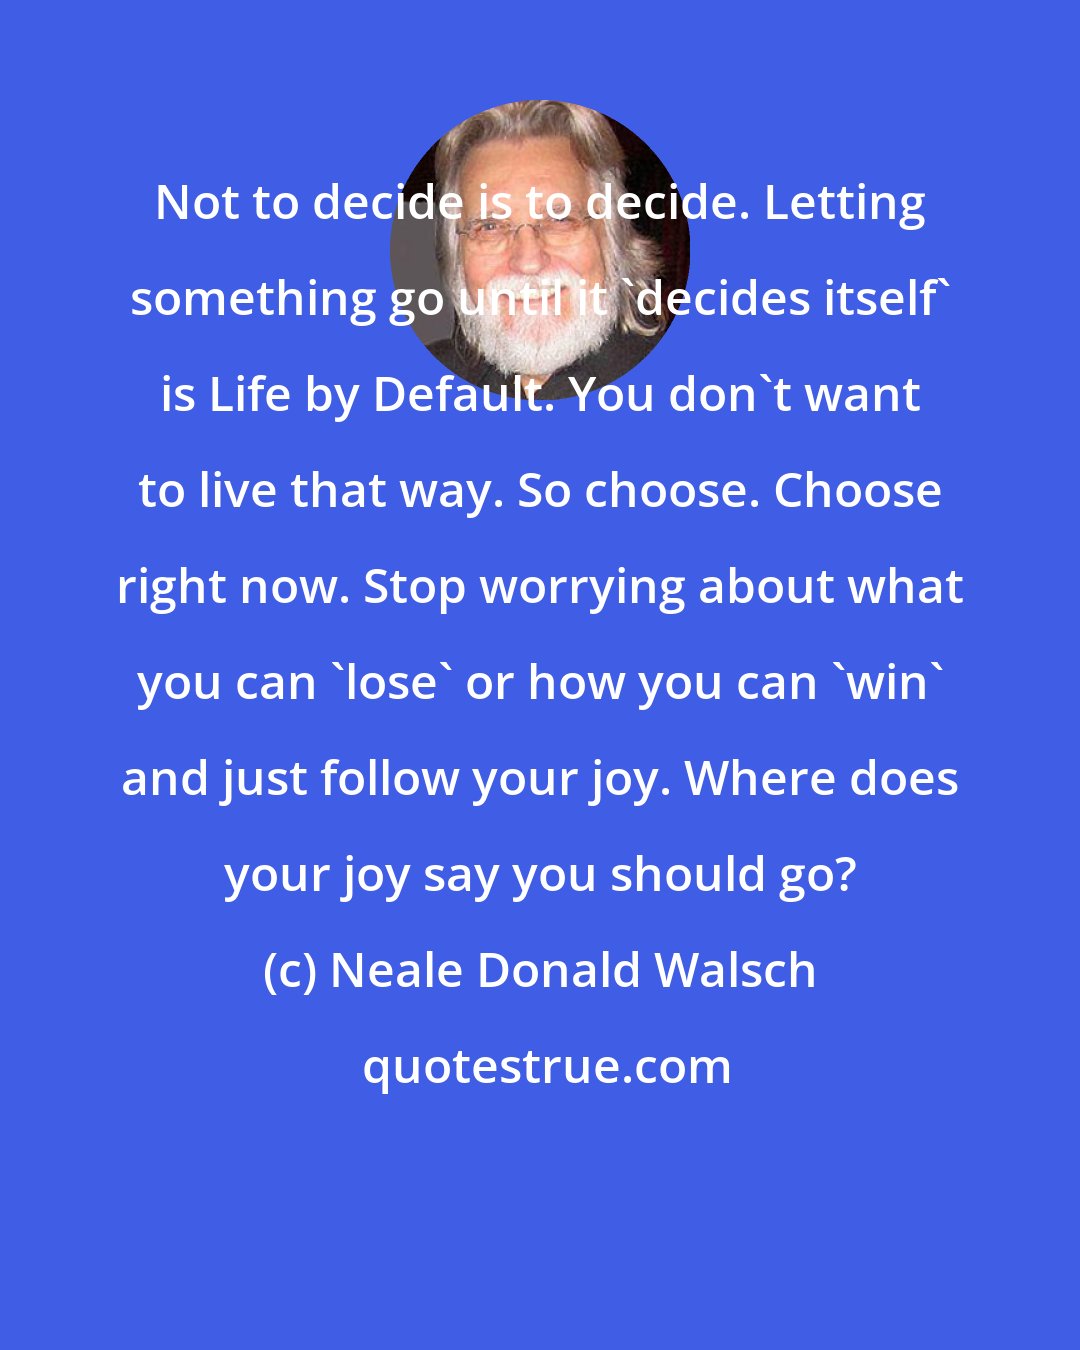 Neale Donald Walsch: Not to decide is to decide. Letting something go until it 'decides itself' is Life by Default. You don't want to live that way. So choose. Choose right now. Stop worrying about what you can 'lose' or how you can 'win' and just follow your joy. Where does your joy say you should go?